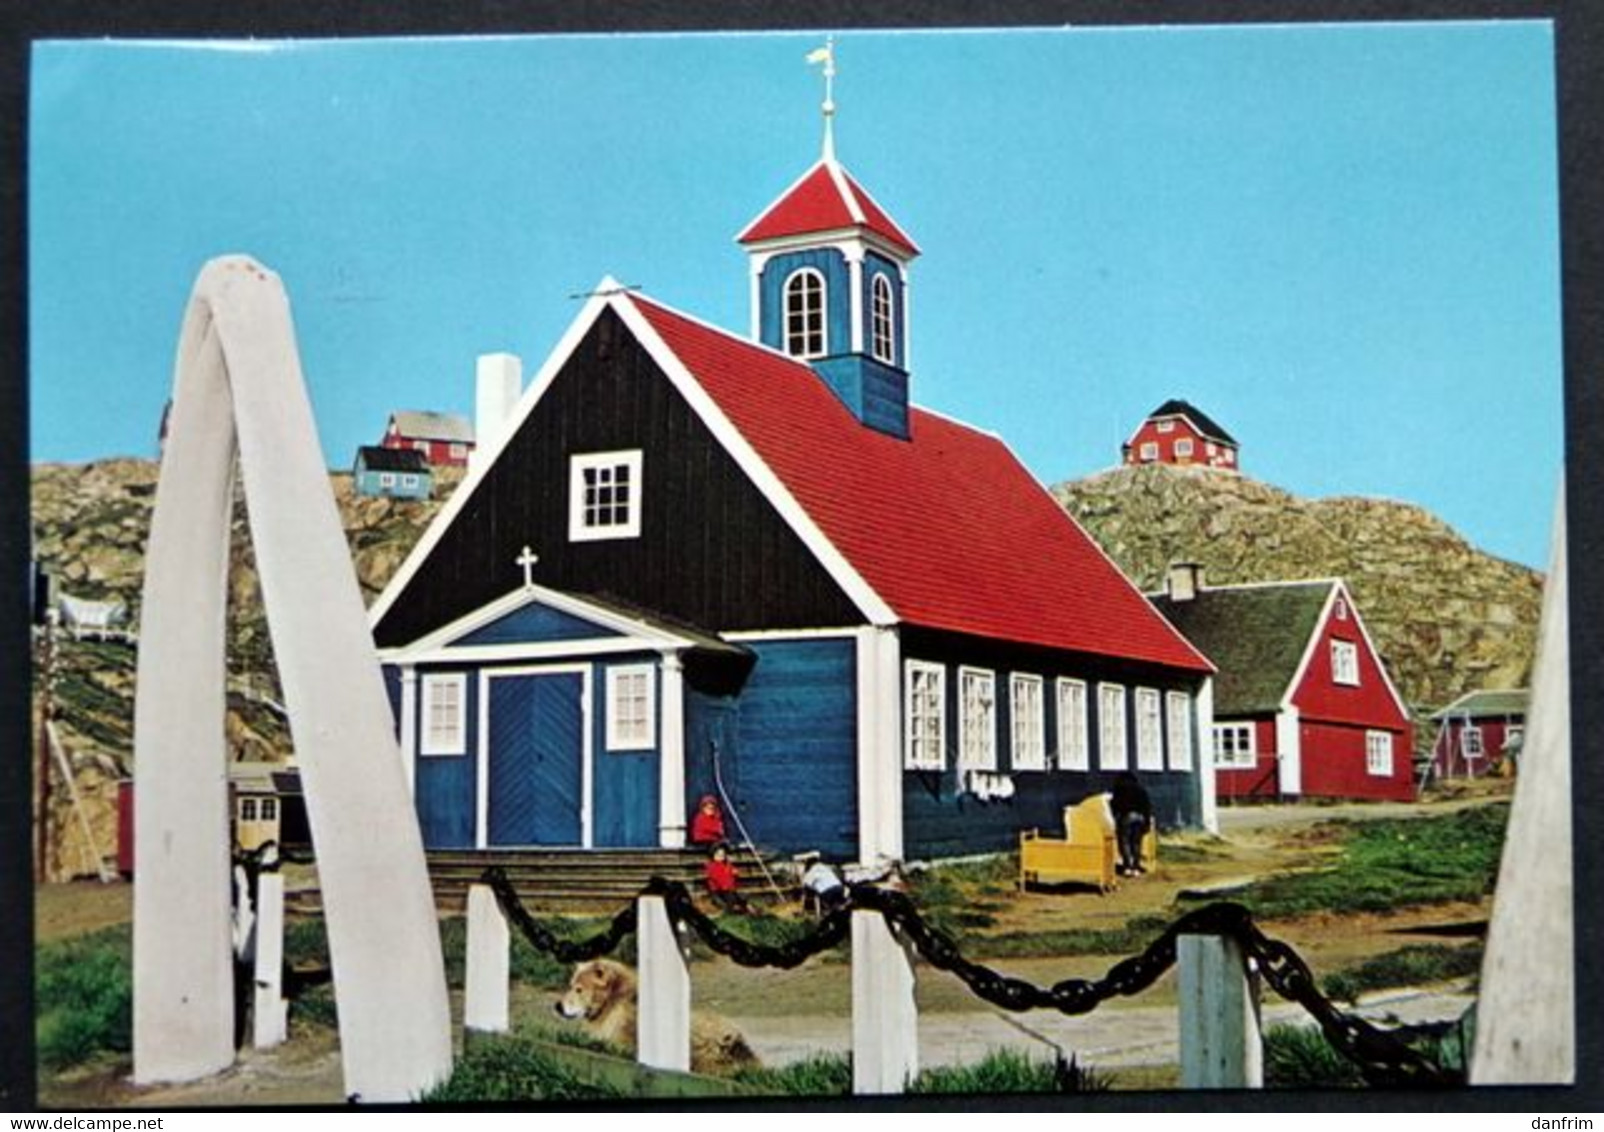 Greenland 1978 THE OLD CHURCH AT HOLSTEINSBORG Cards HOLSTEINSBORG 1-11-1978 ( Lot 1596 ) - Groenland